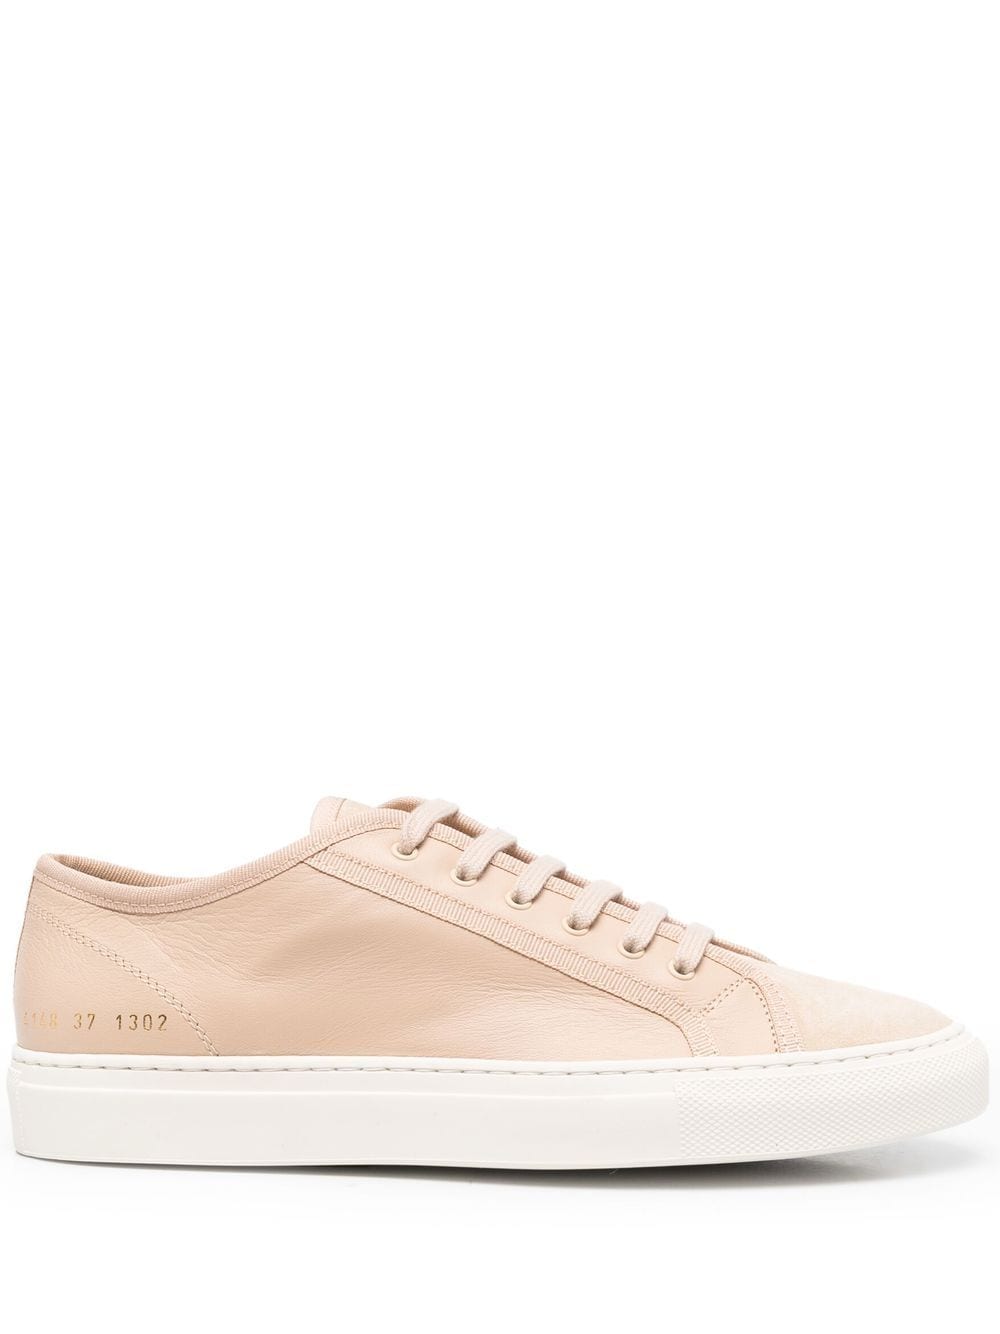 Common Projects Tournament Sneakers - Nude von Common Projects